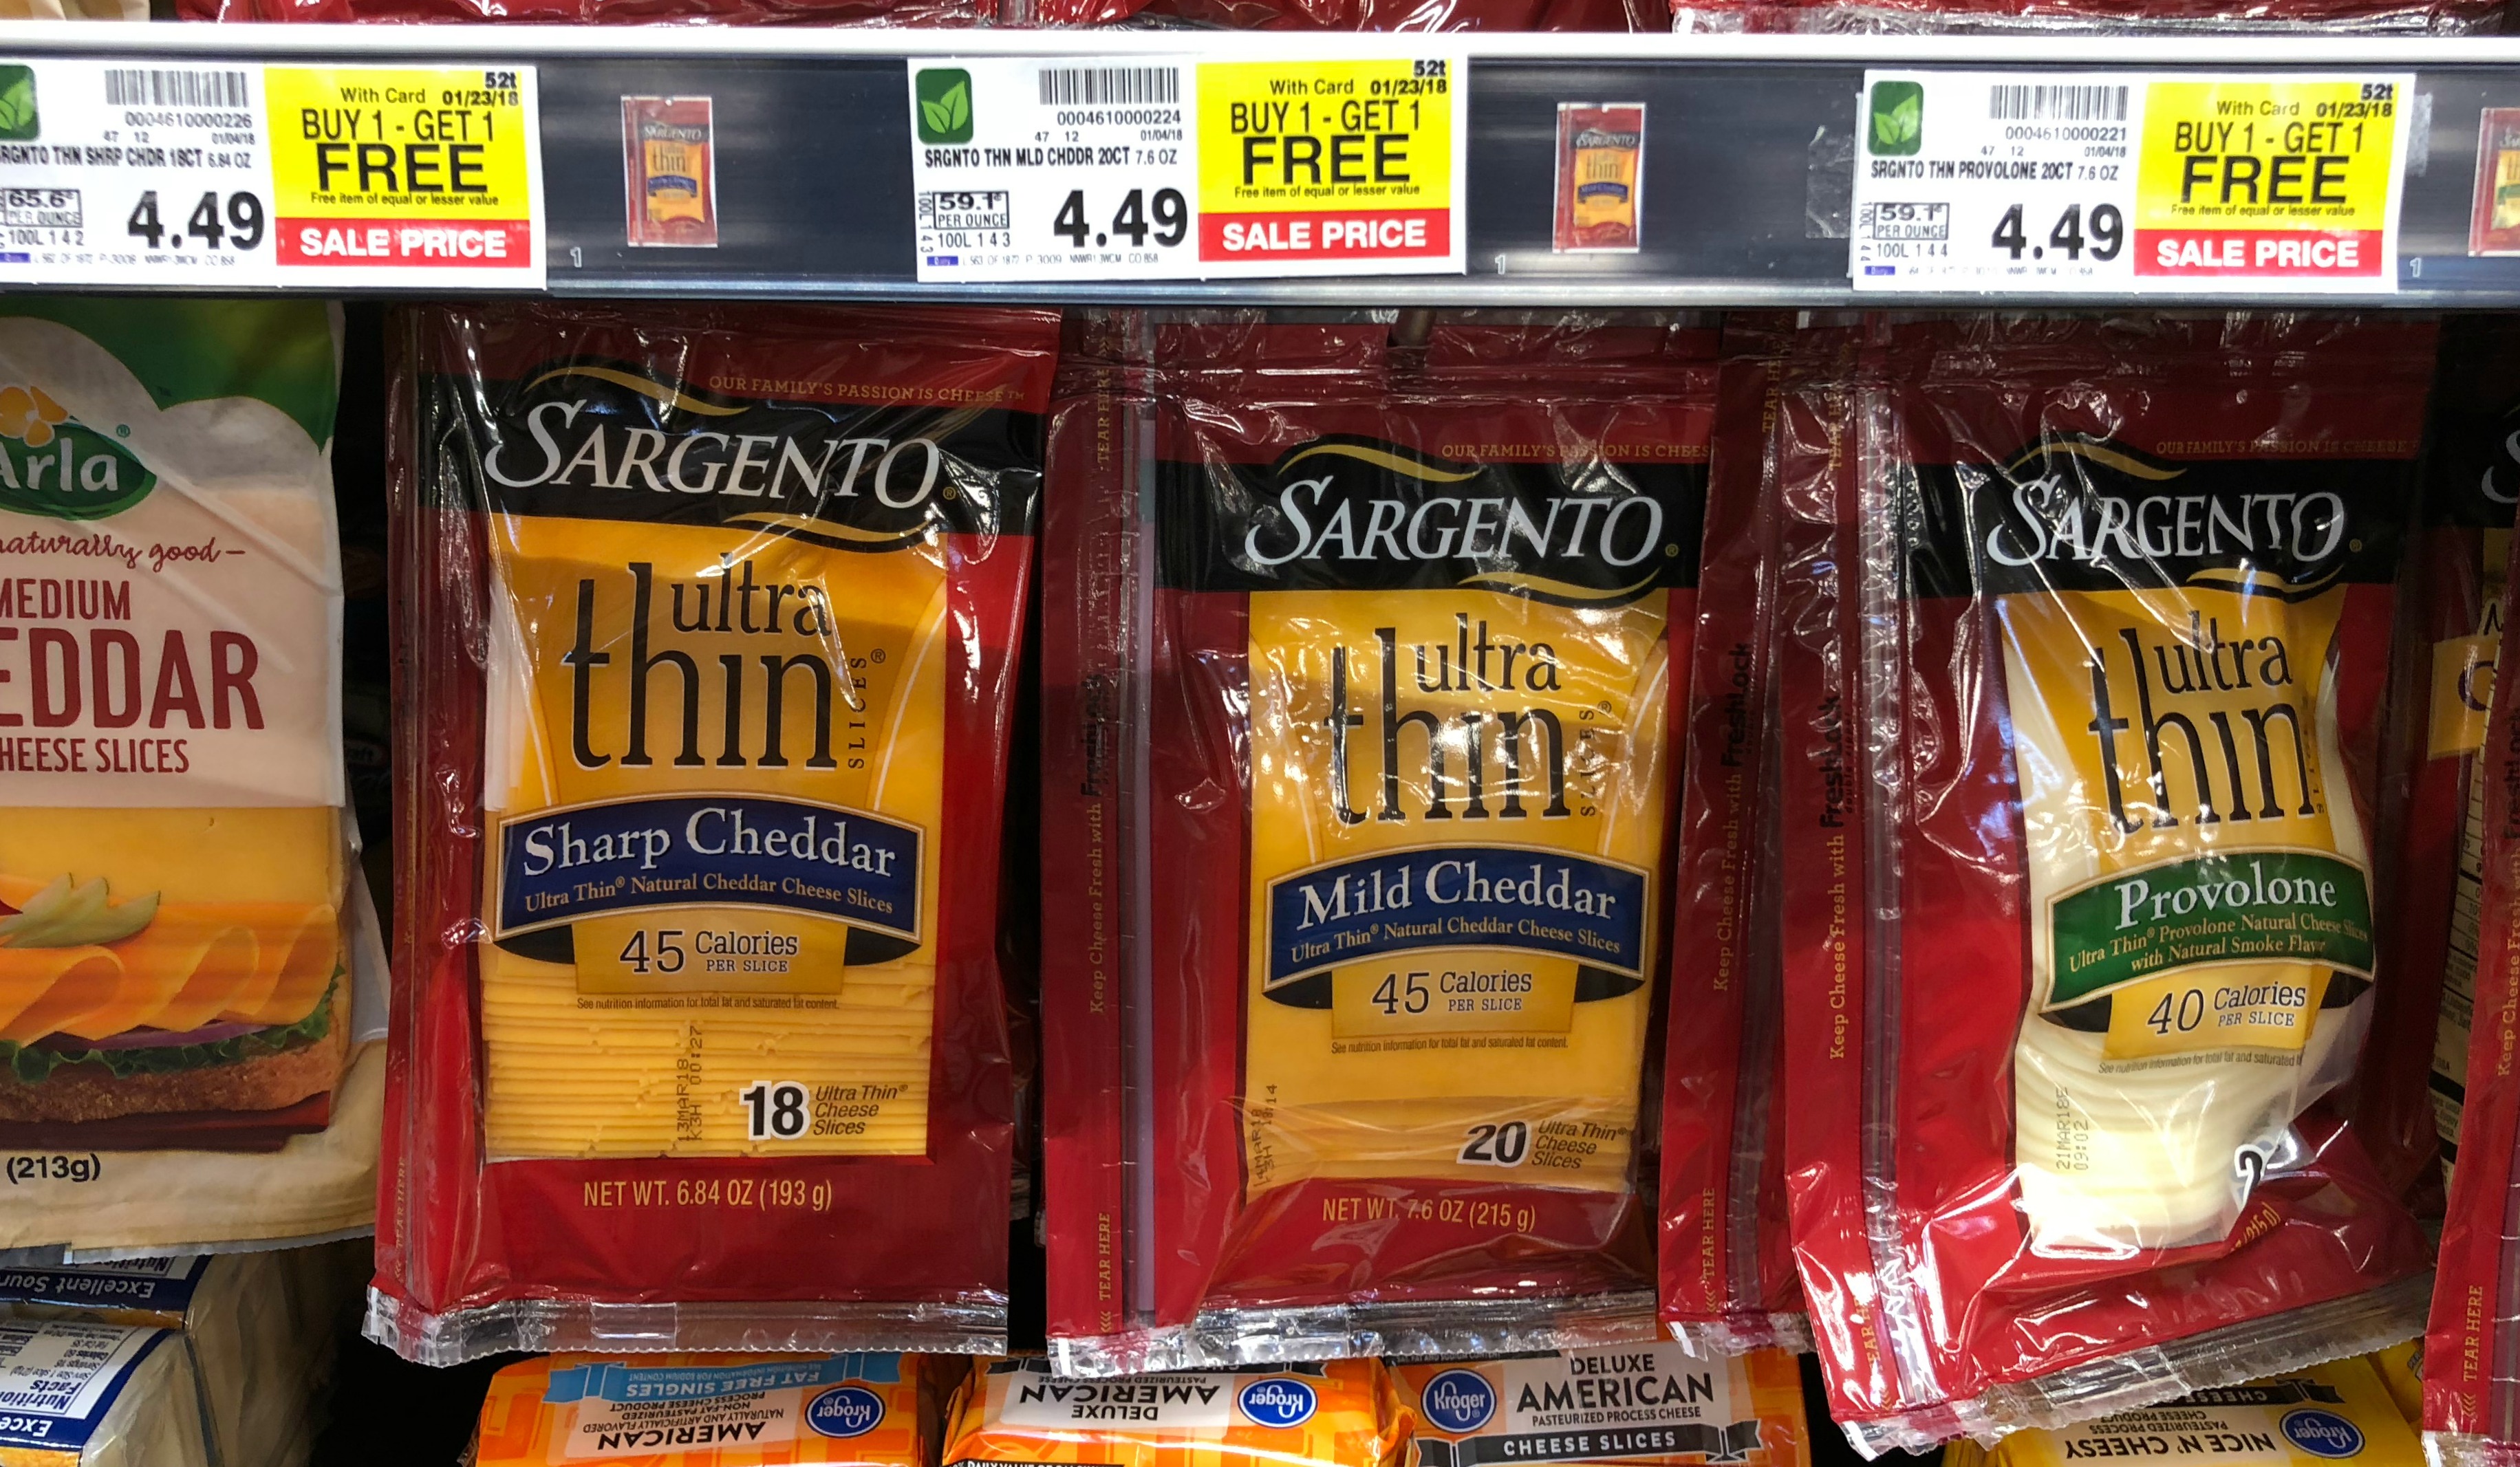 NEW Sargento Coupon | Ultra Thin Cheese Slices as low as $1.75 at ...